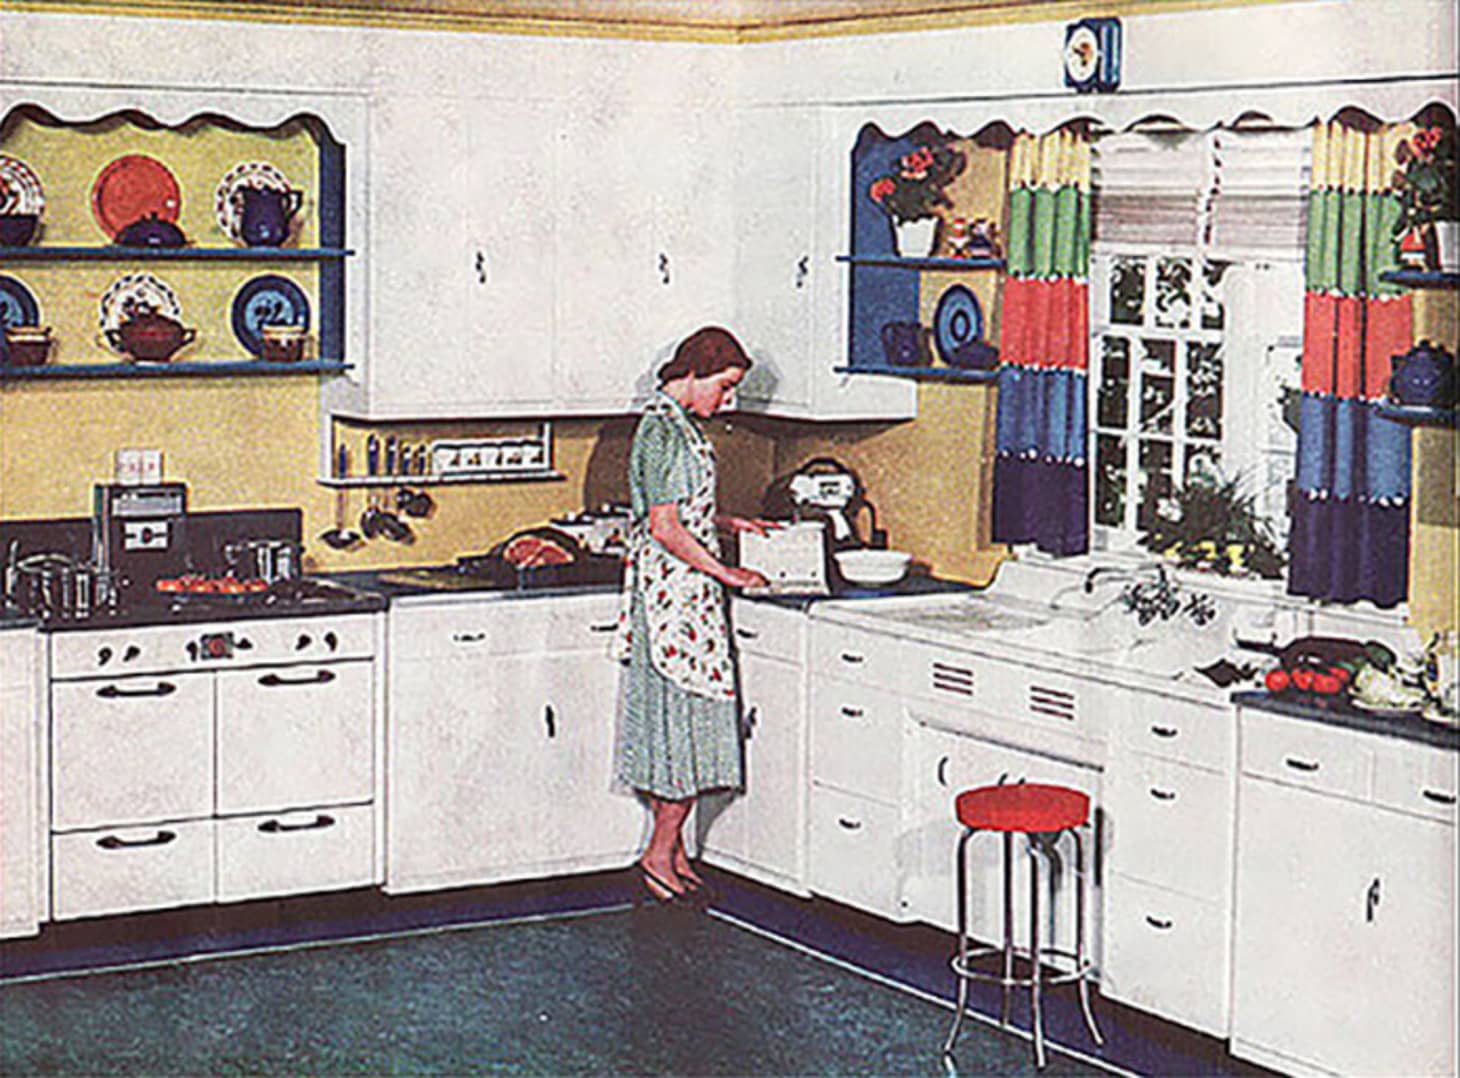 A Brief History Of Kitchen Design From The 1930s To 1940s